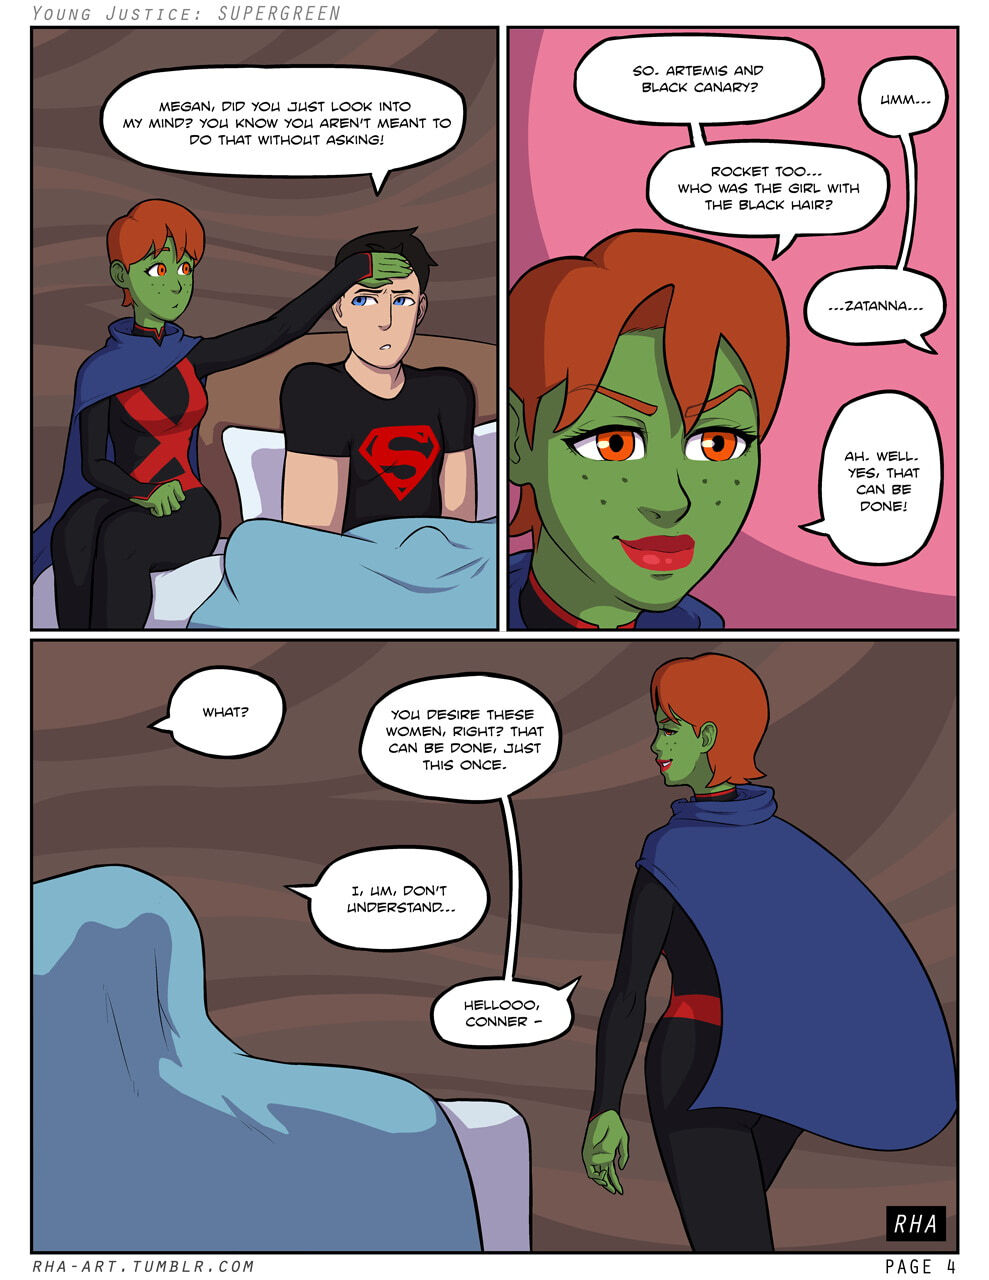 Young Justice - Supergreen - Page 5